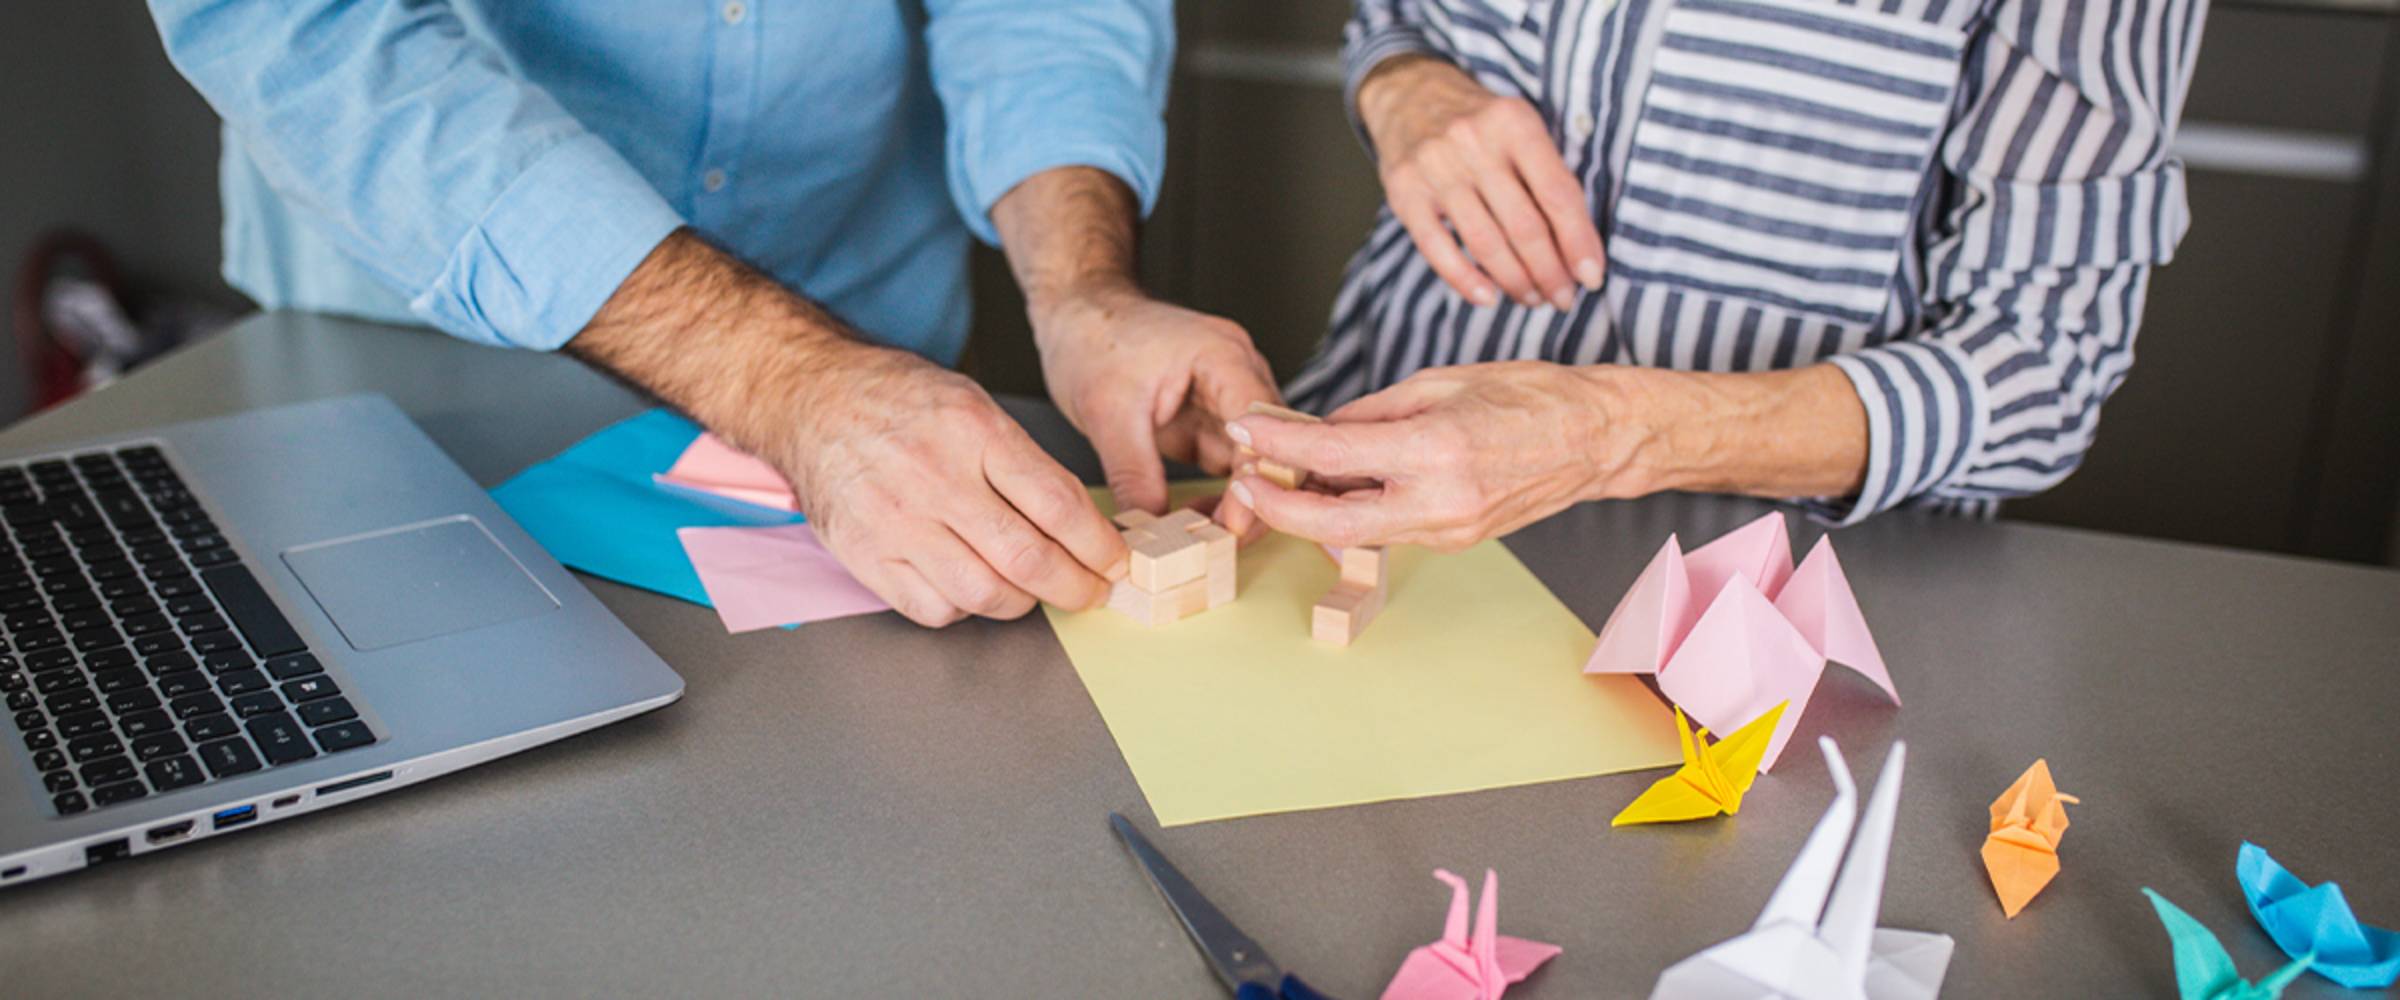 Easy Crafts for Seniors with Dementia - Kids Art & Craft